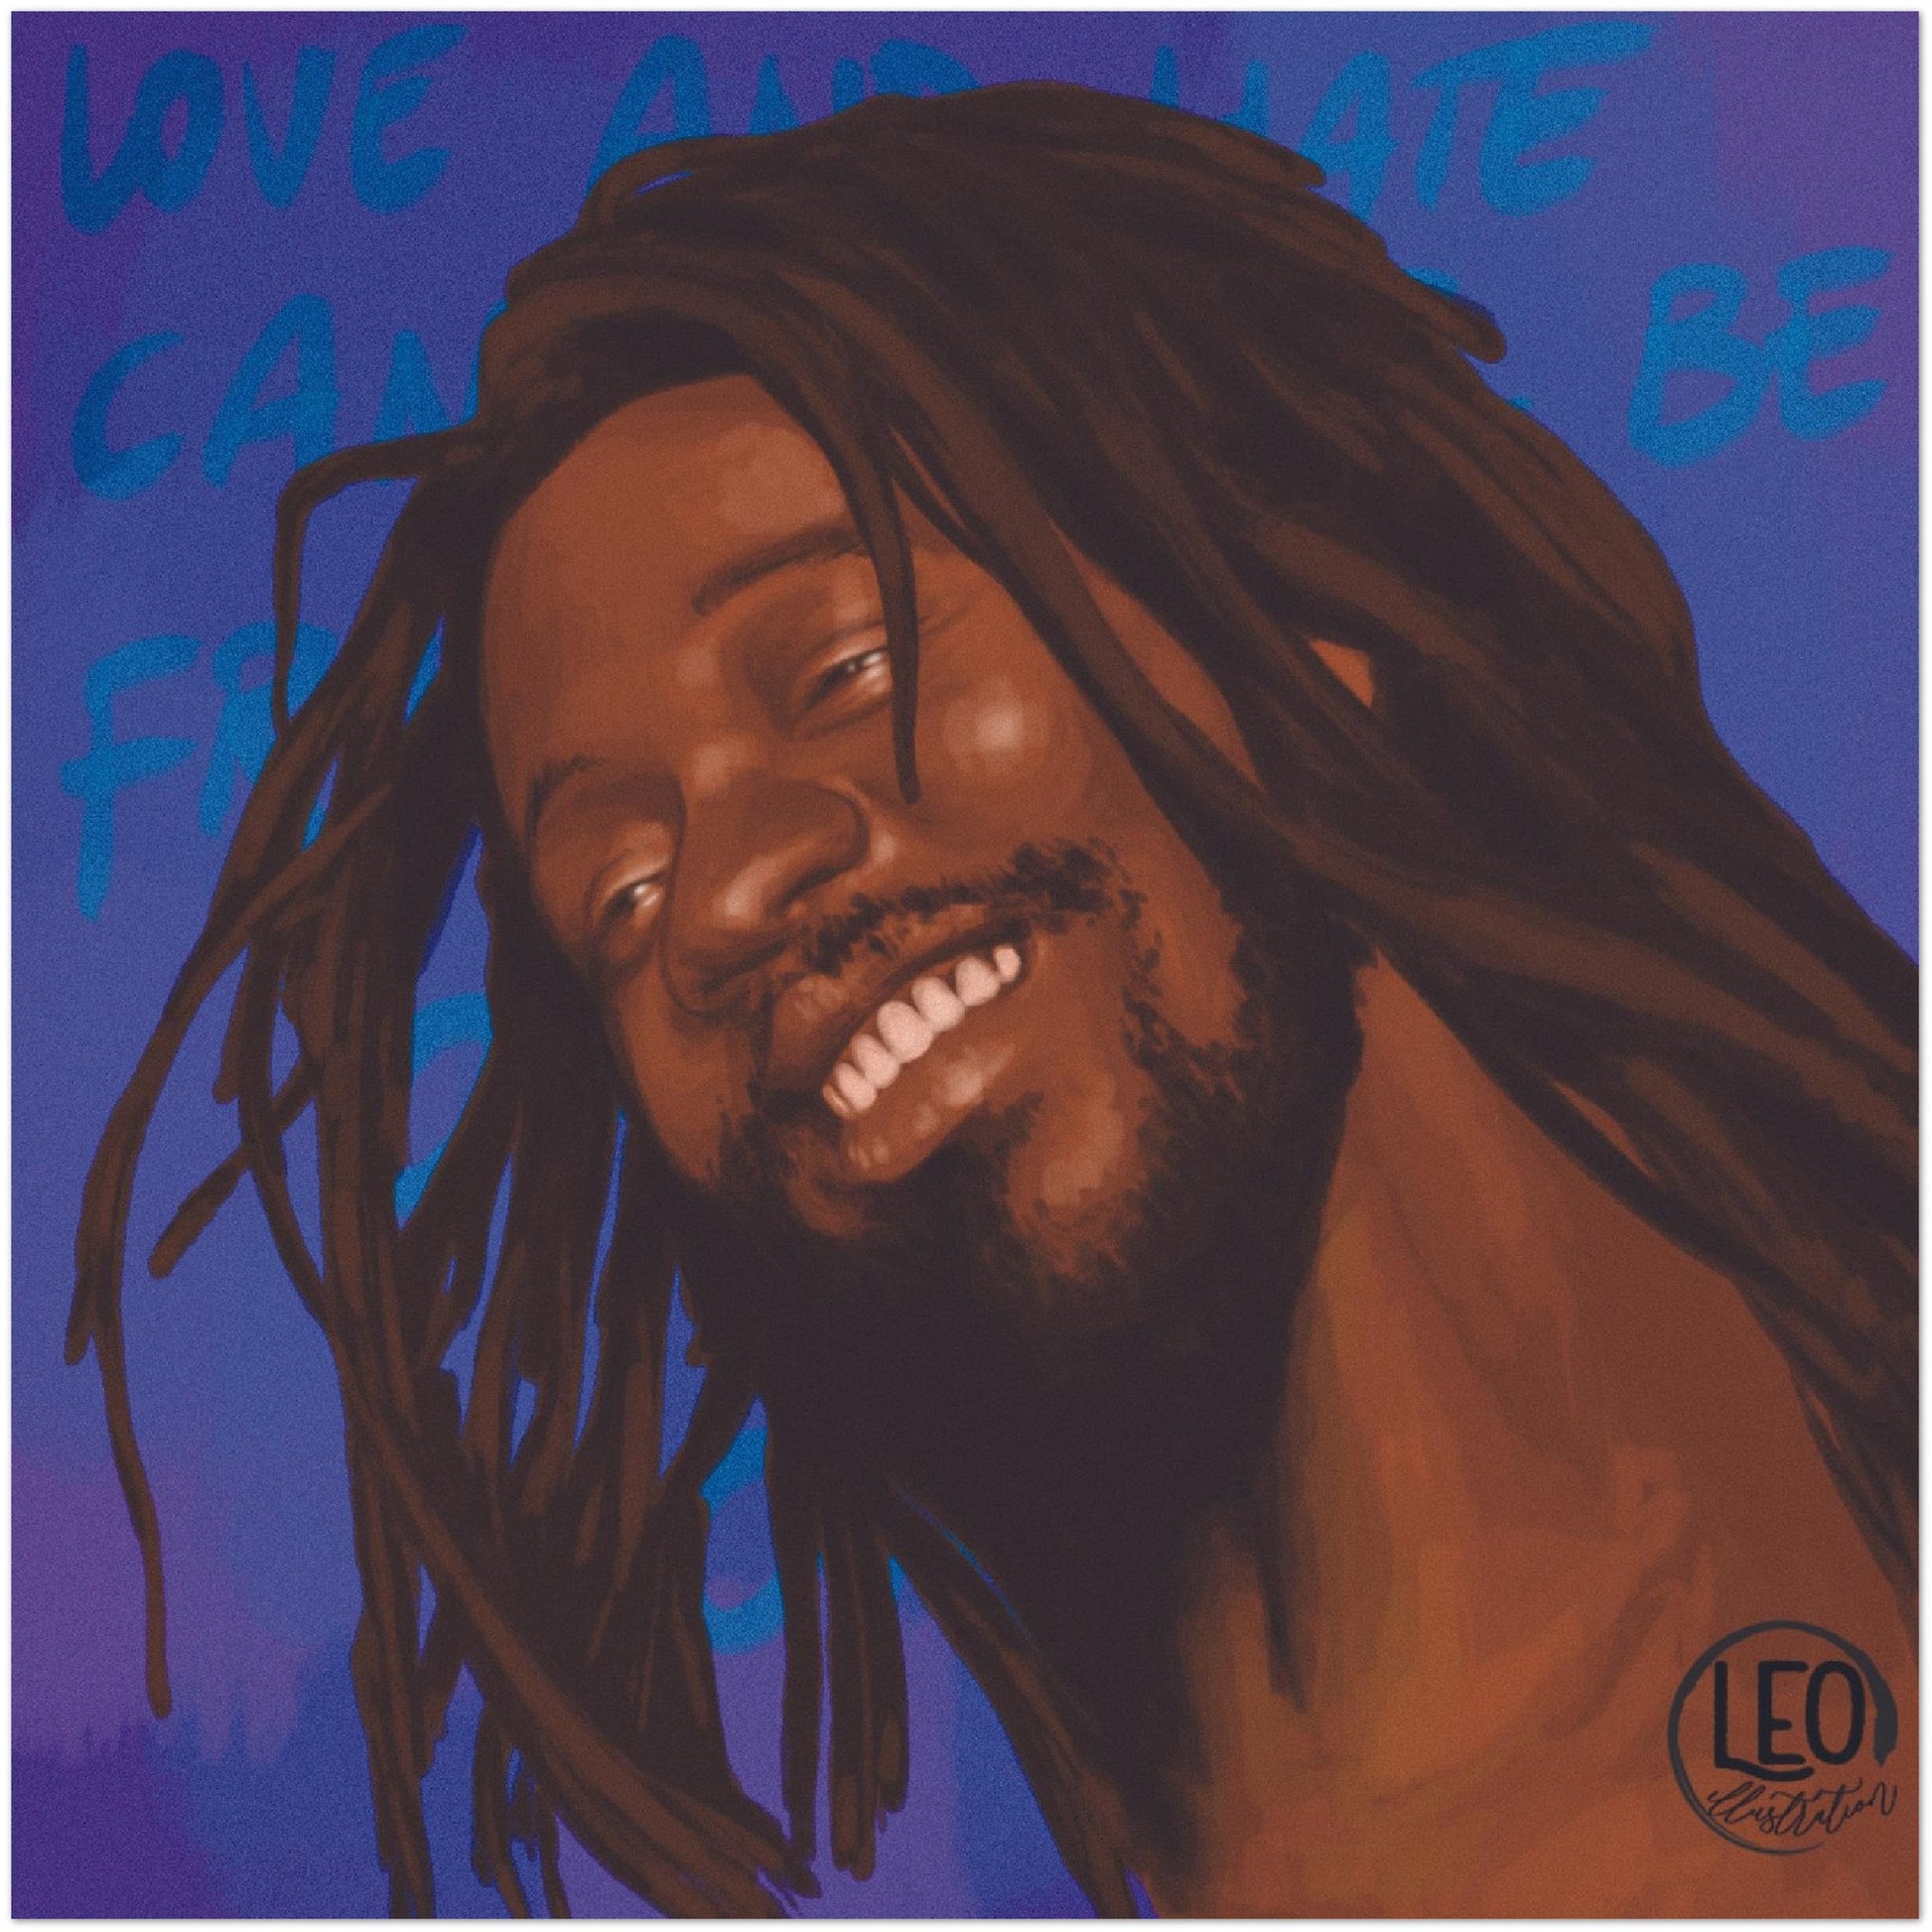 Dennis Brown art portrait from Leonora, print it on a fine poster in good quality! Reggae Art prints!